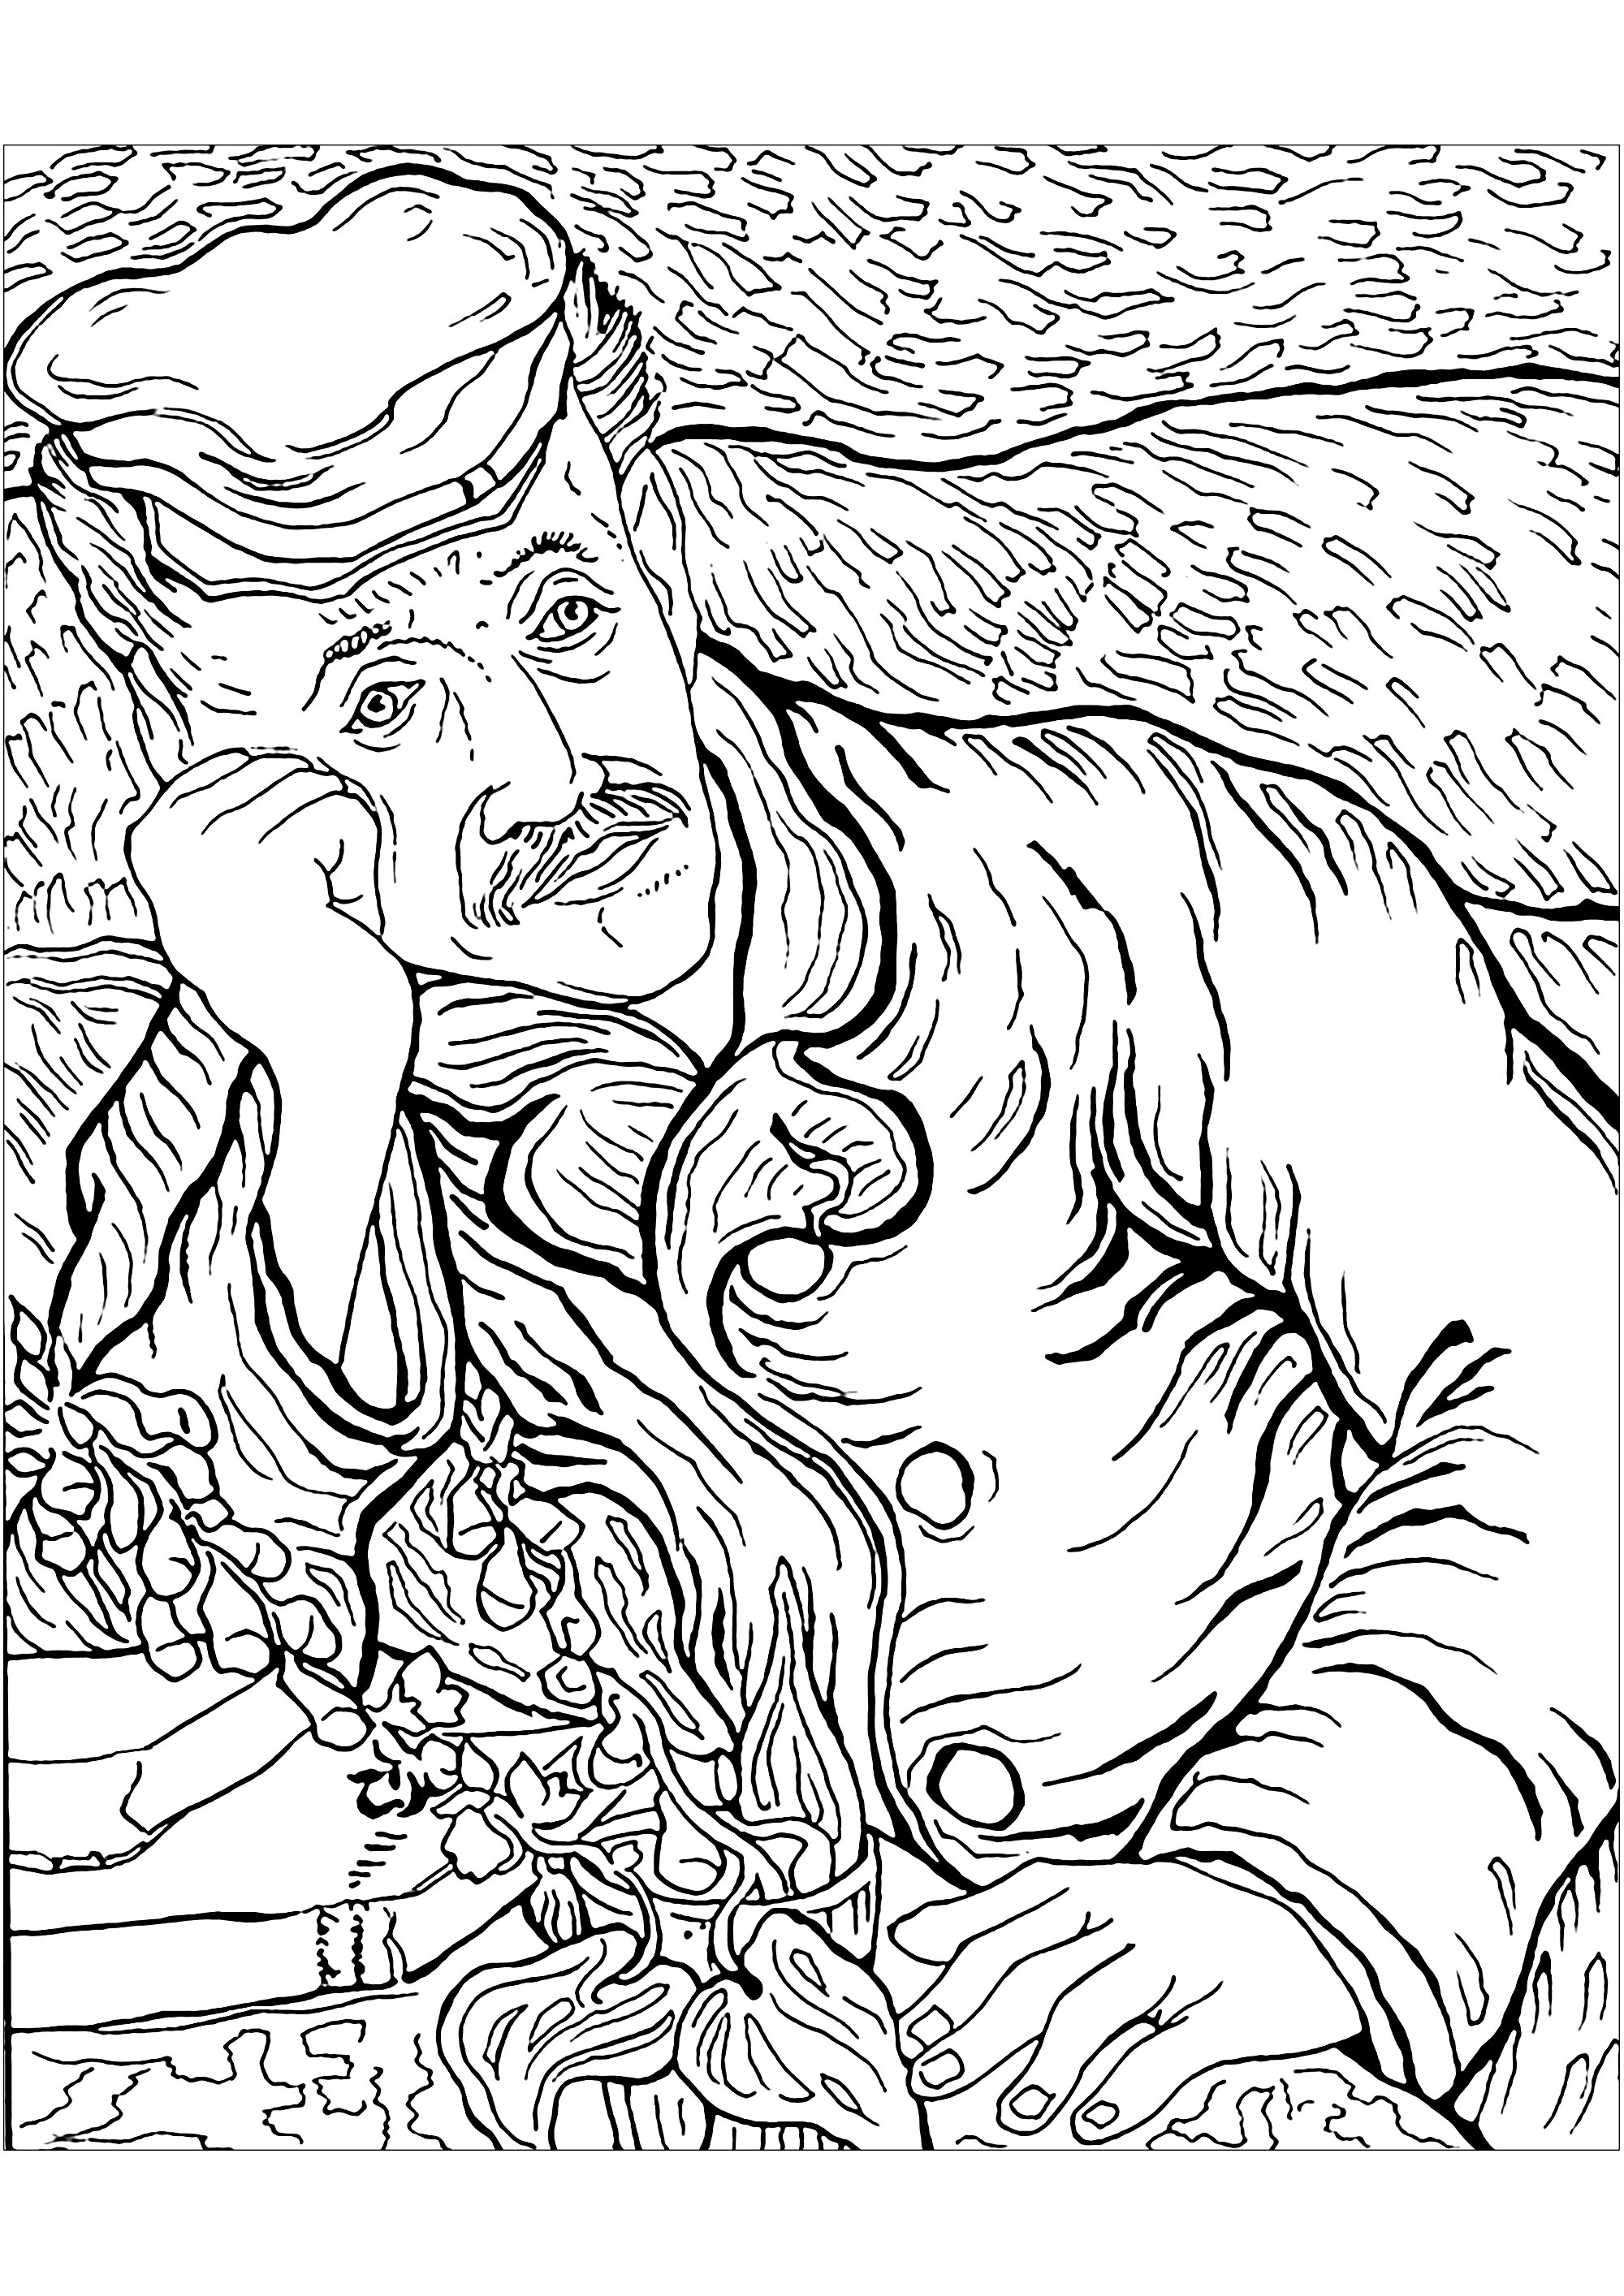 Drawing to color inspired by a masterpiece by the great Vincent Van Gogh : Portrait of Dr Gachet